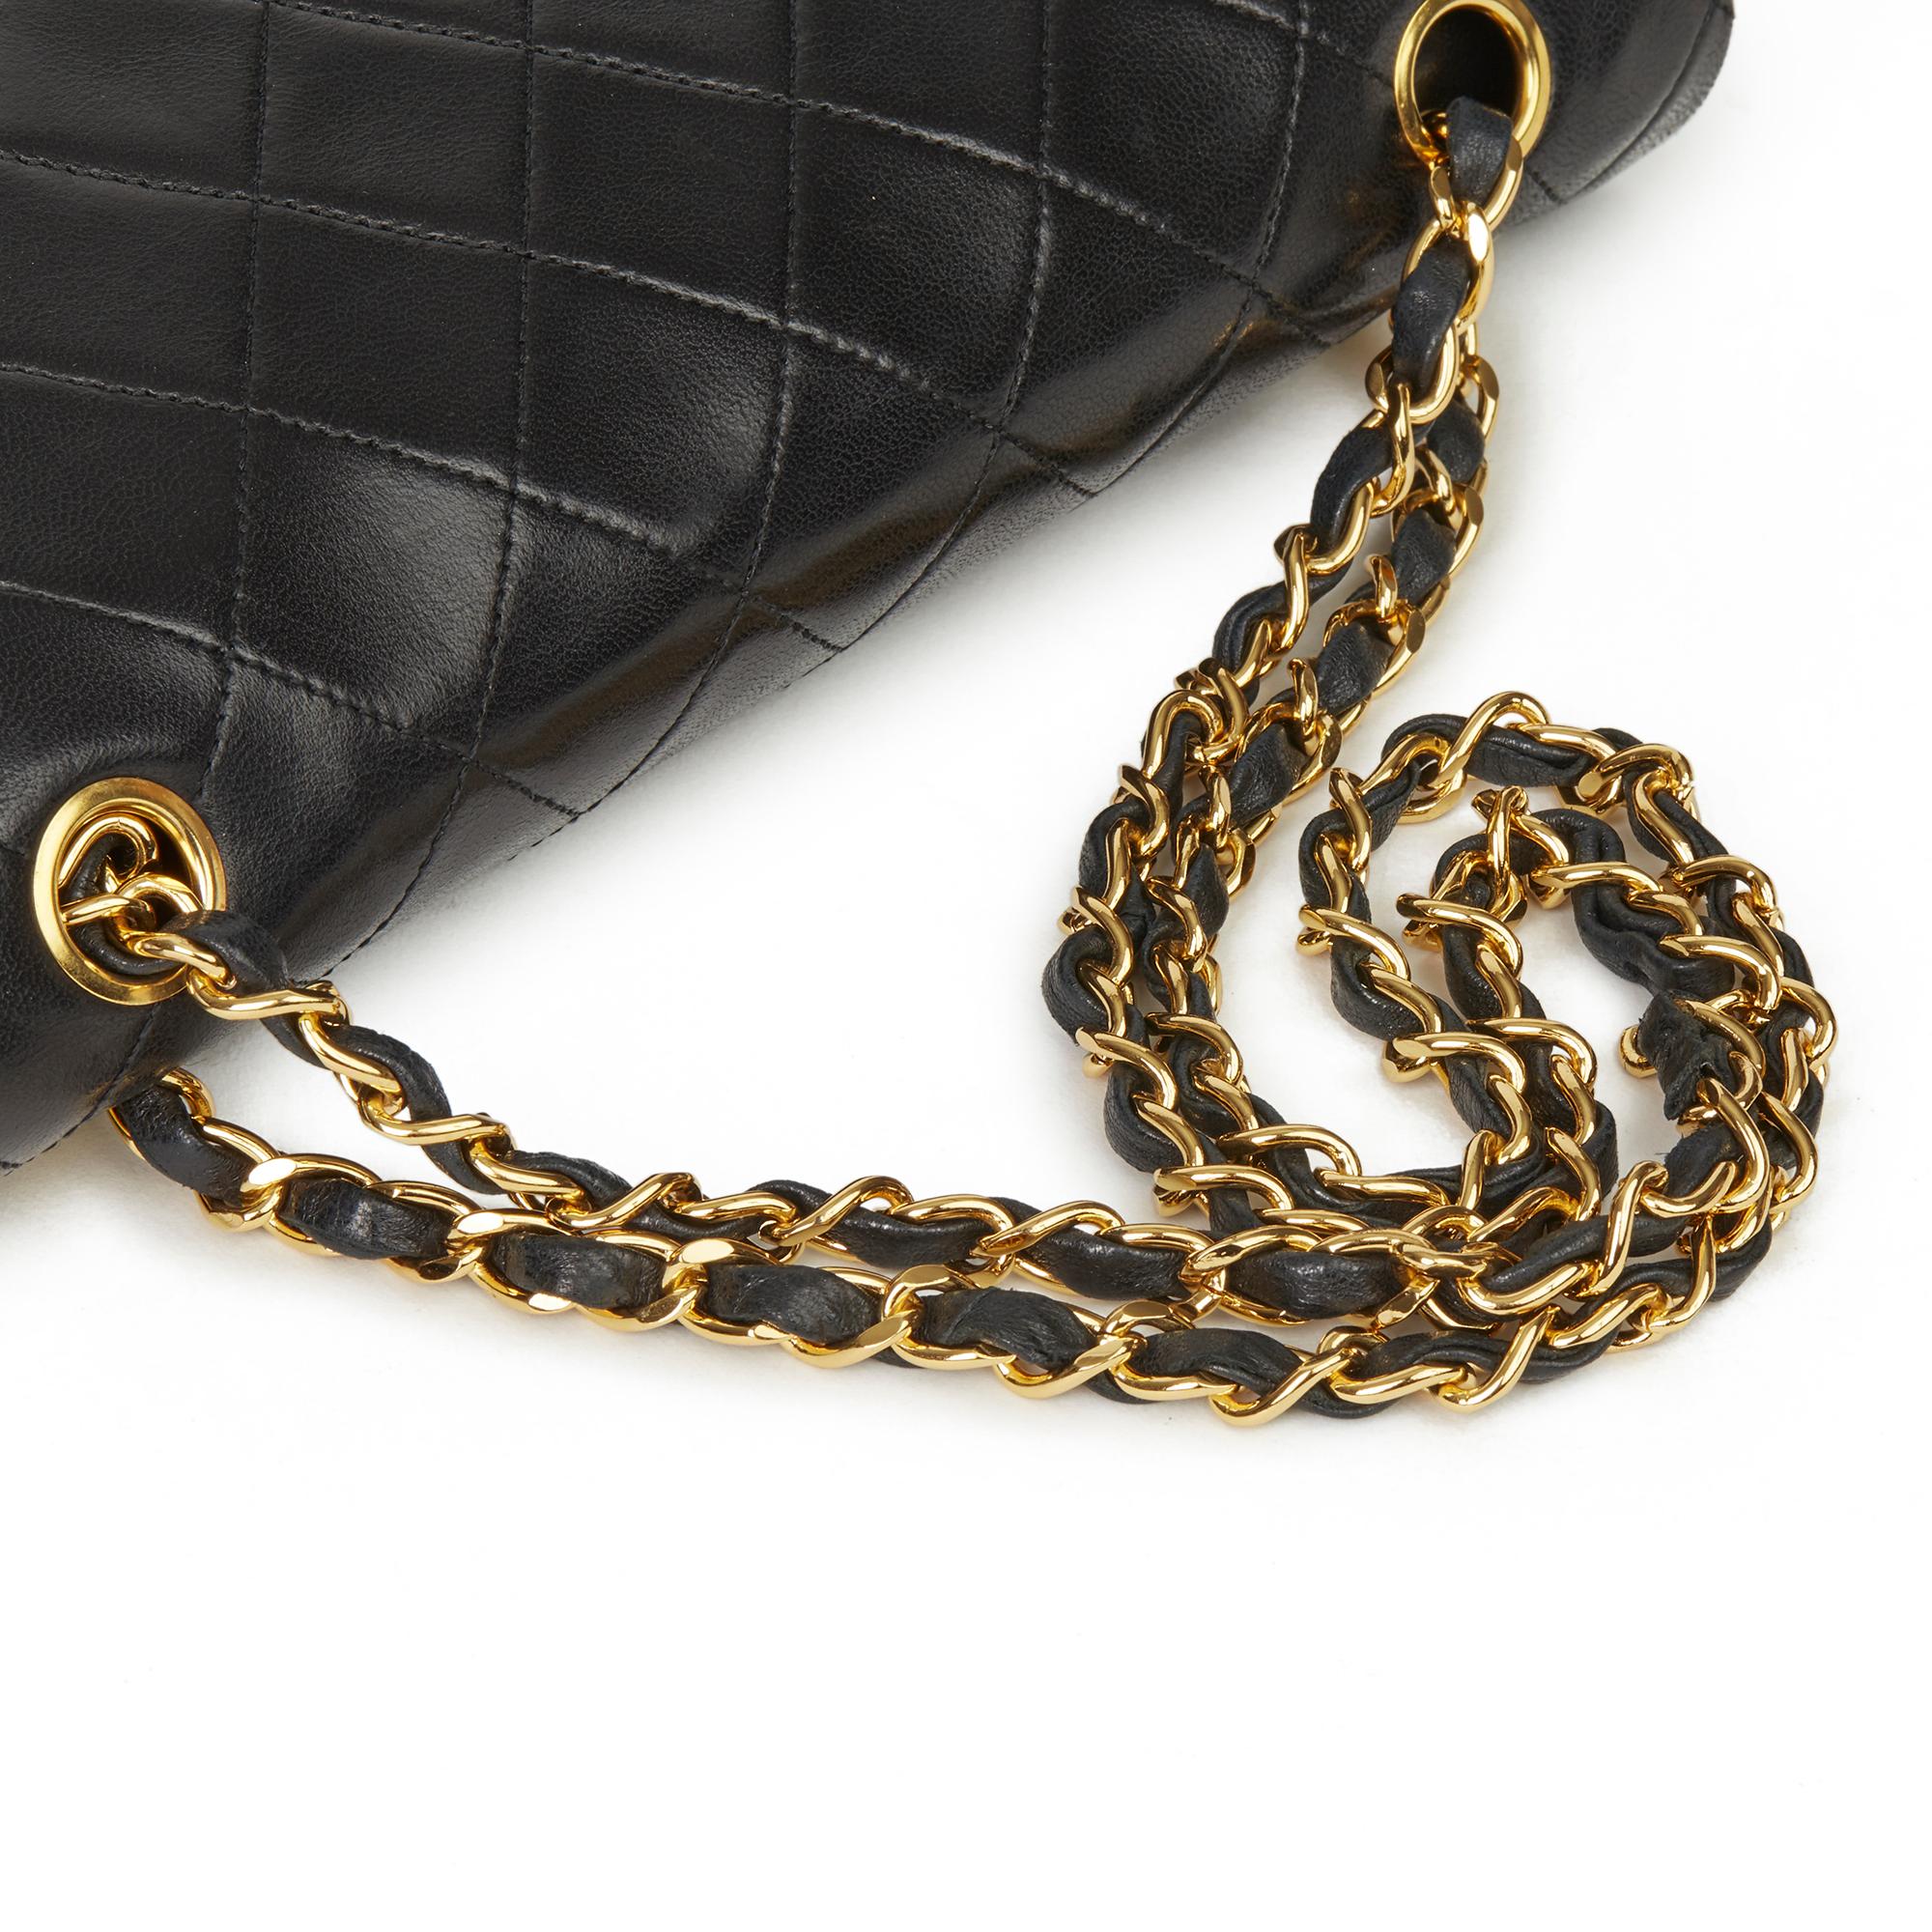 1989 Chanel Black Quilted Lambskin Vintage Medium Classic Double Flap Bag 3